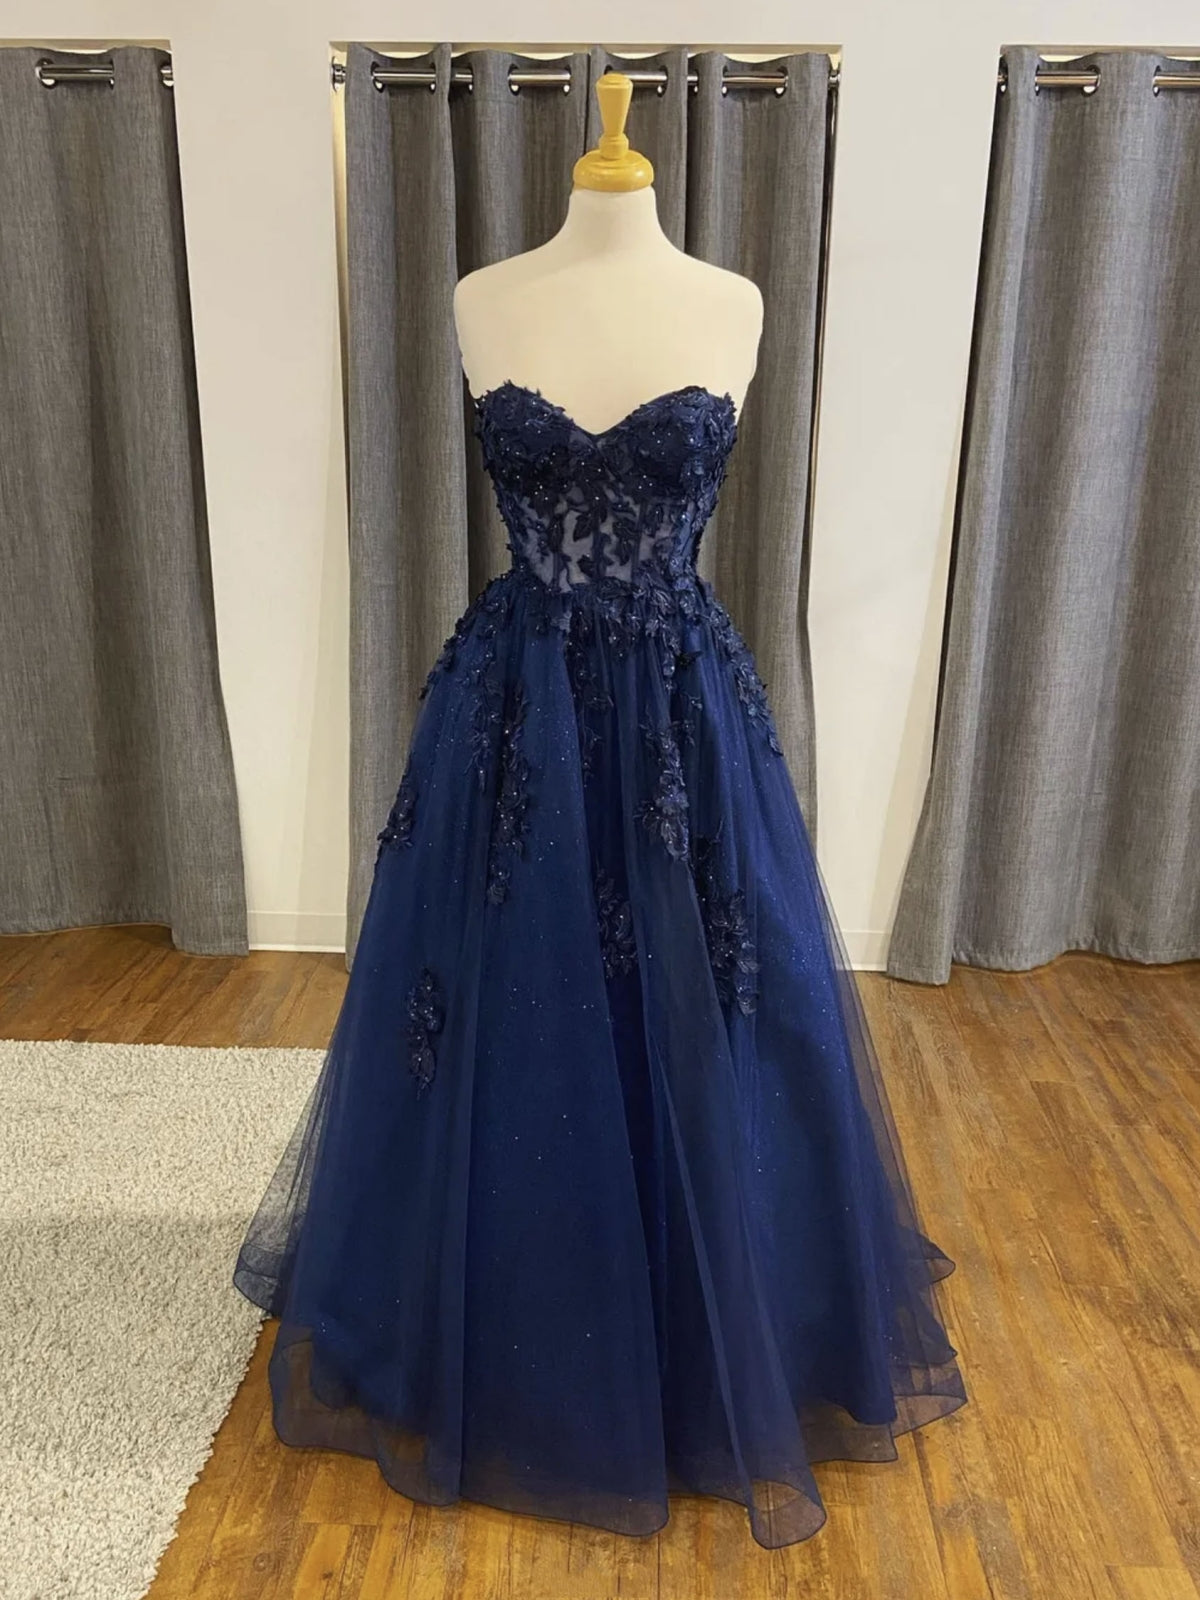 Open Back Navy Blue Lace Beaded Long Prom Dresses For Black girls For Women,Formal Graduation Party Dress